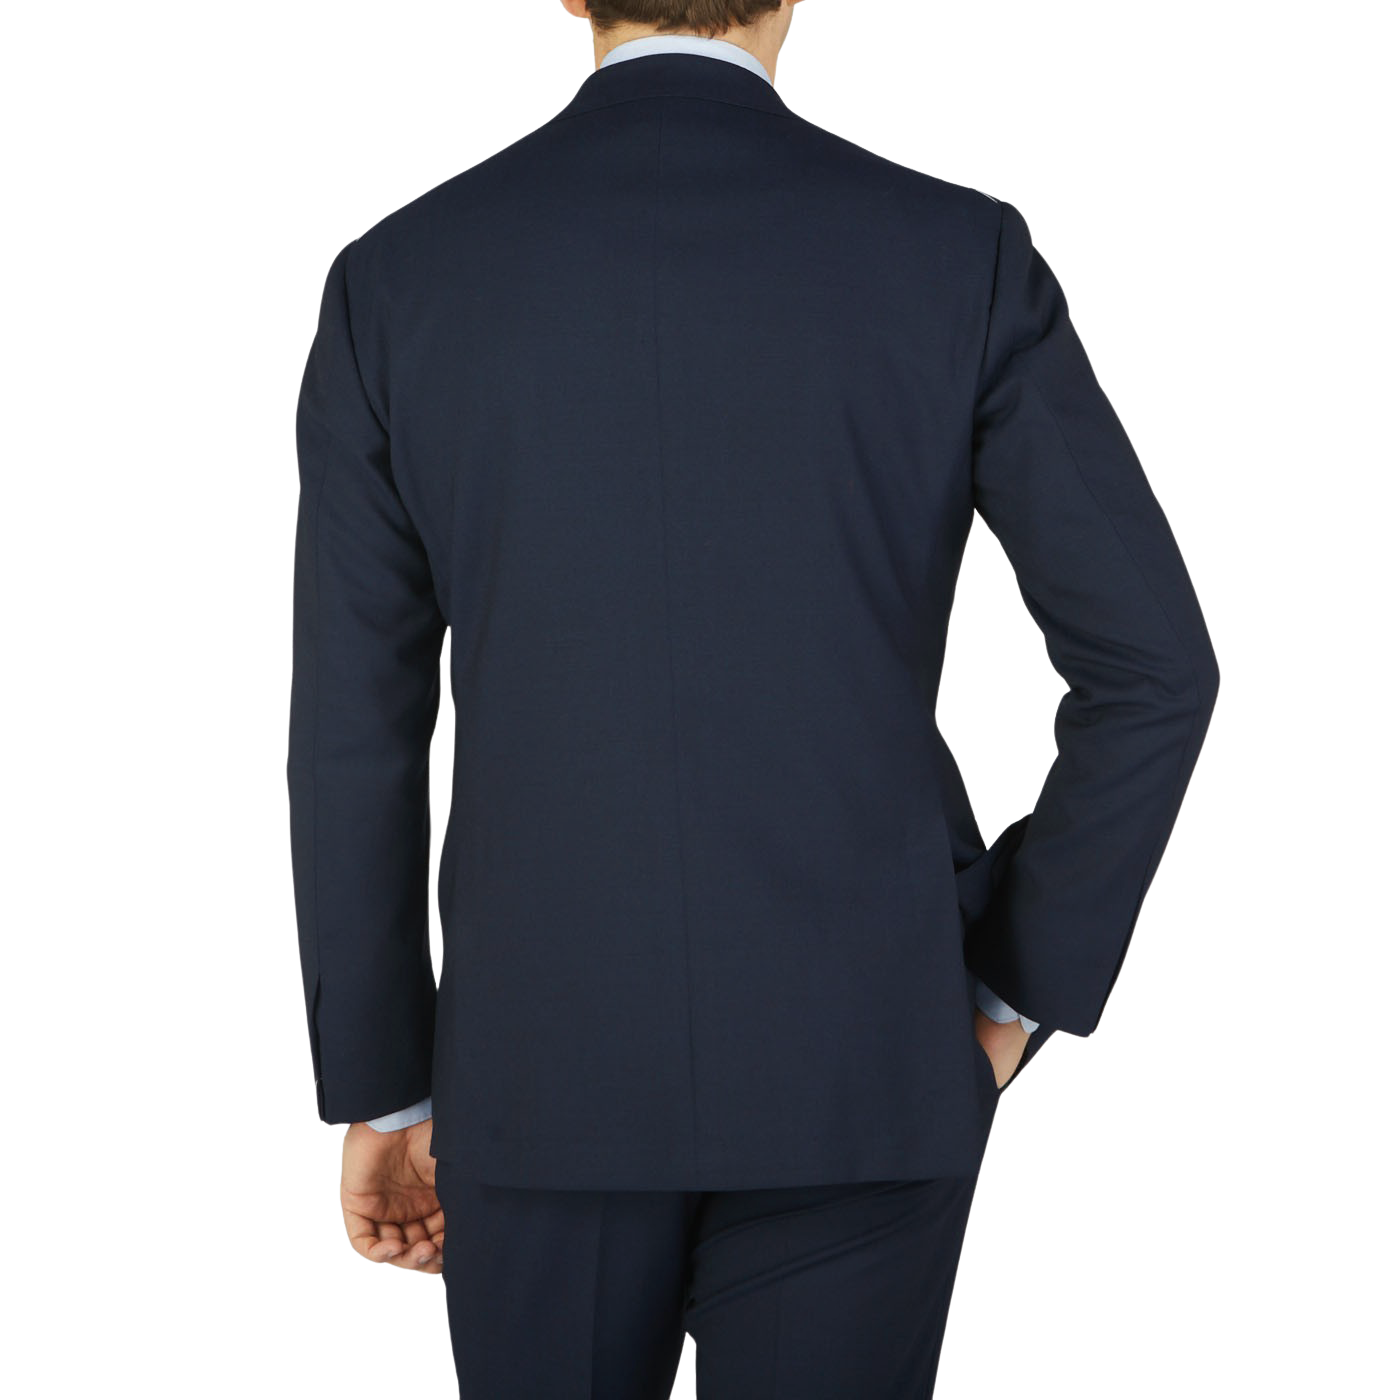 A man viewed from behind, wearing a navy blue high twist wool suit and matching pants in fresco fabric by Ring Jacket against a light background.